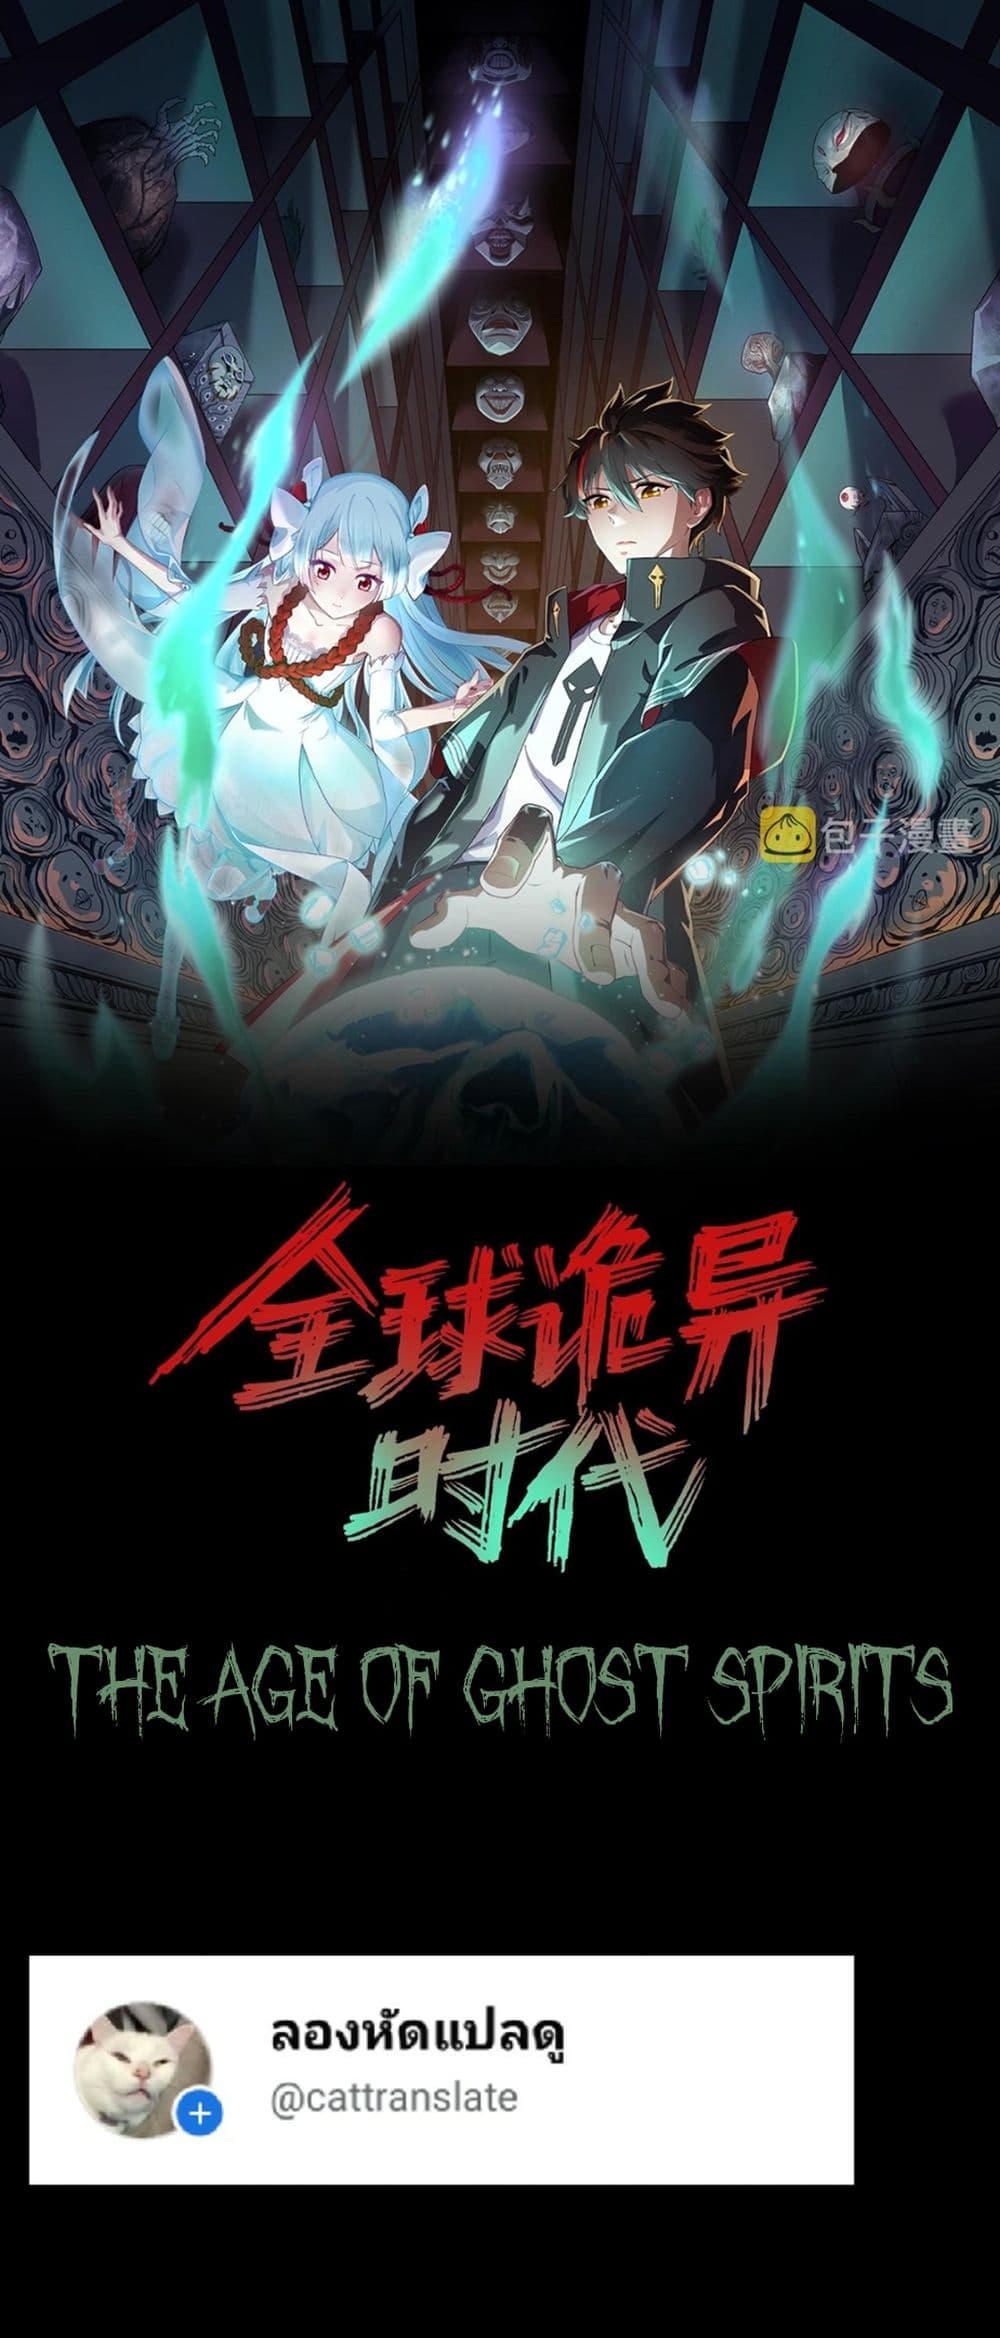 The Age of Ghost Spirits à¸à¸­à¸à¸à¸µà¹ 14 (1)